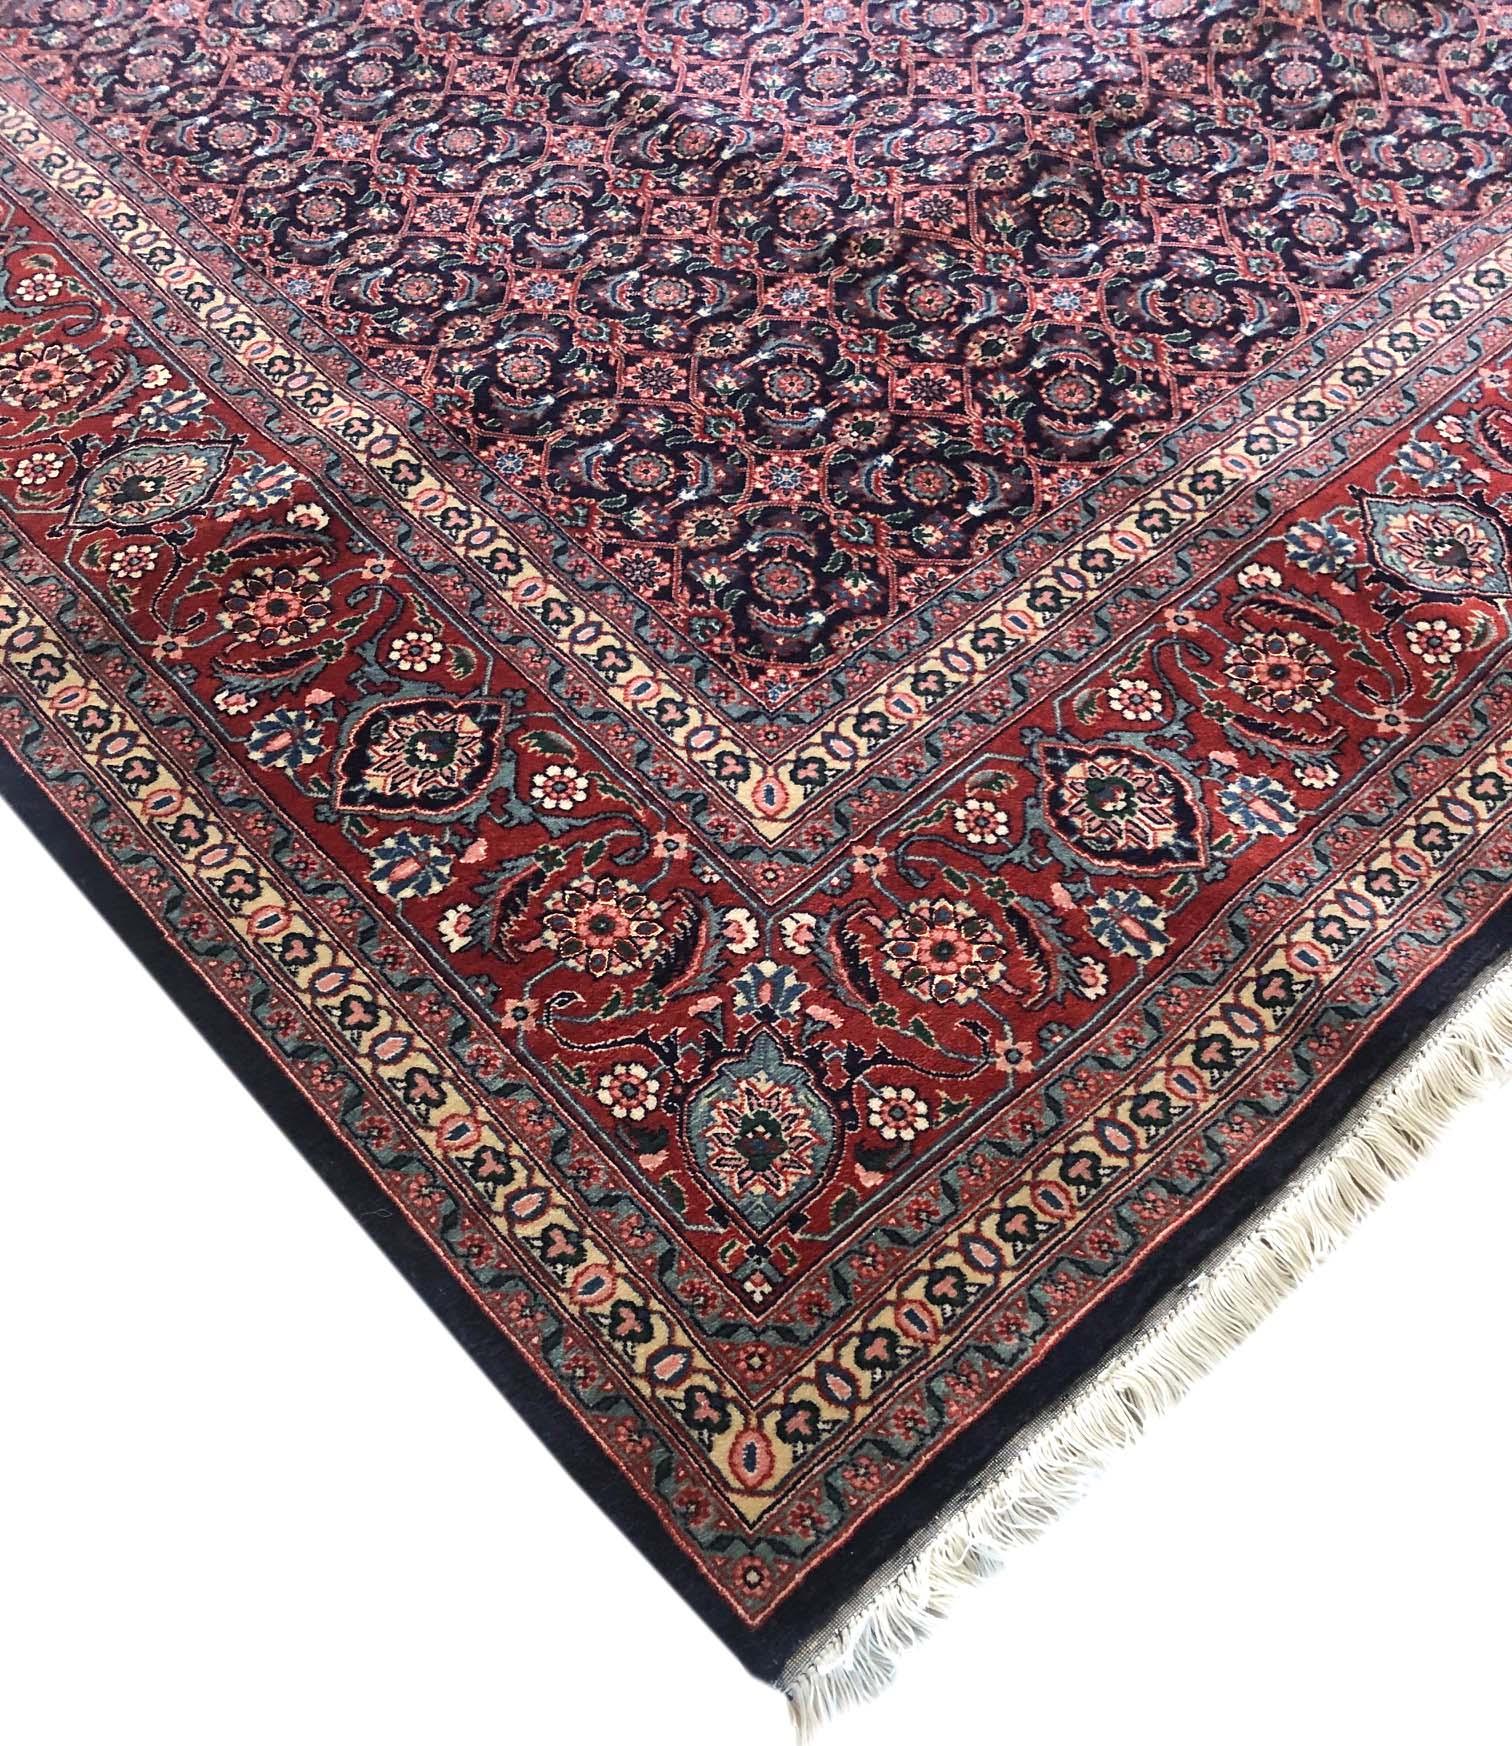 Persian Hand Knotted All-Over Herati Red Tabriz Runner Rug 4